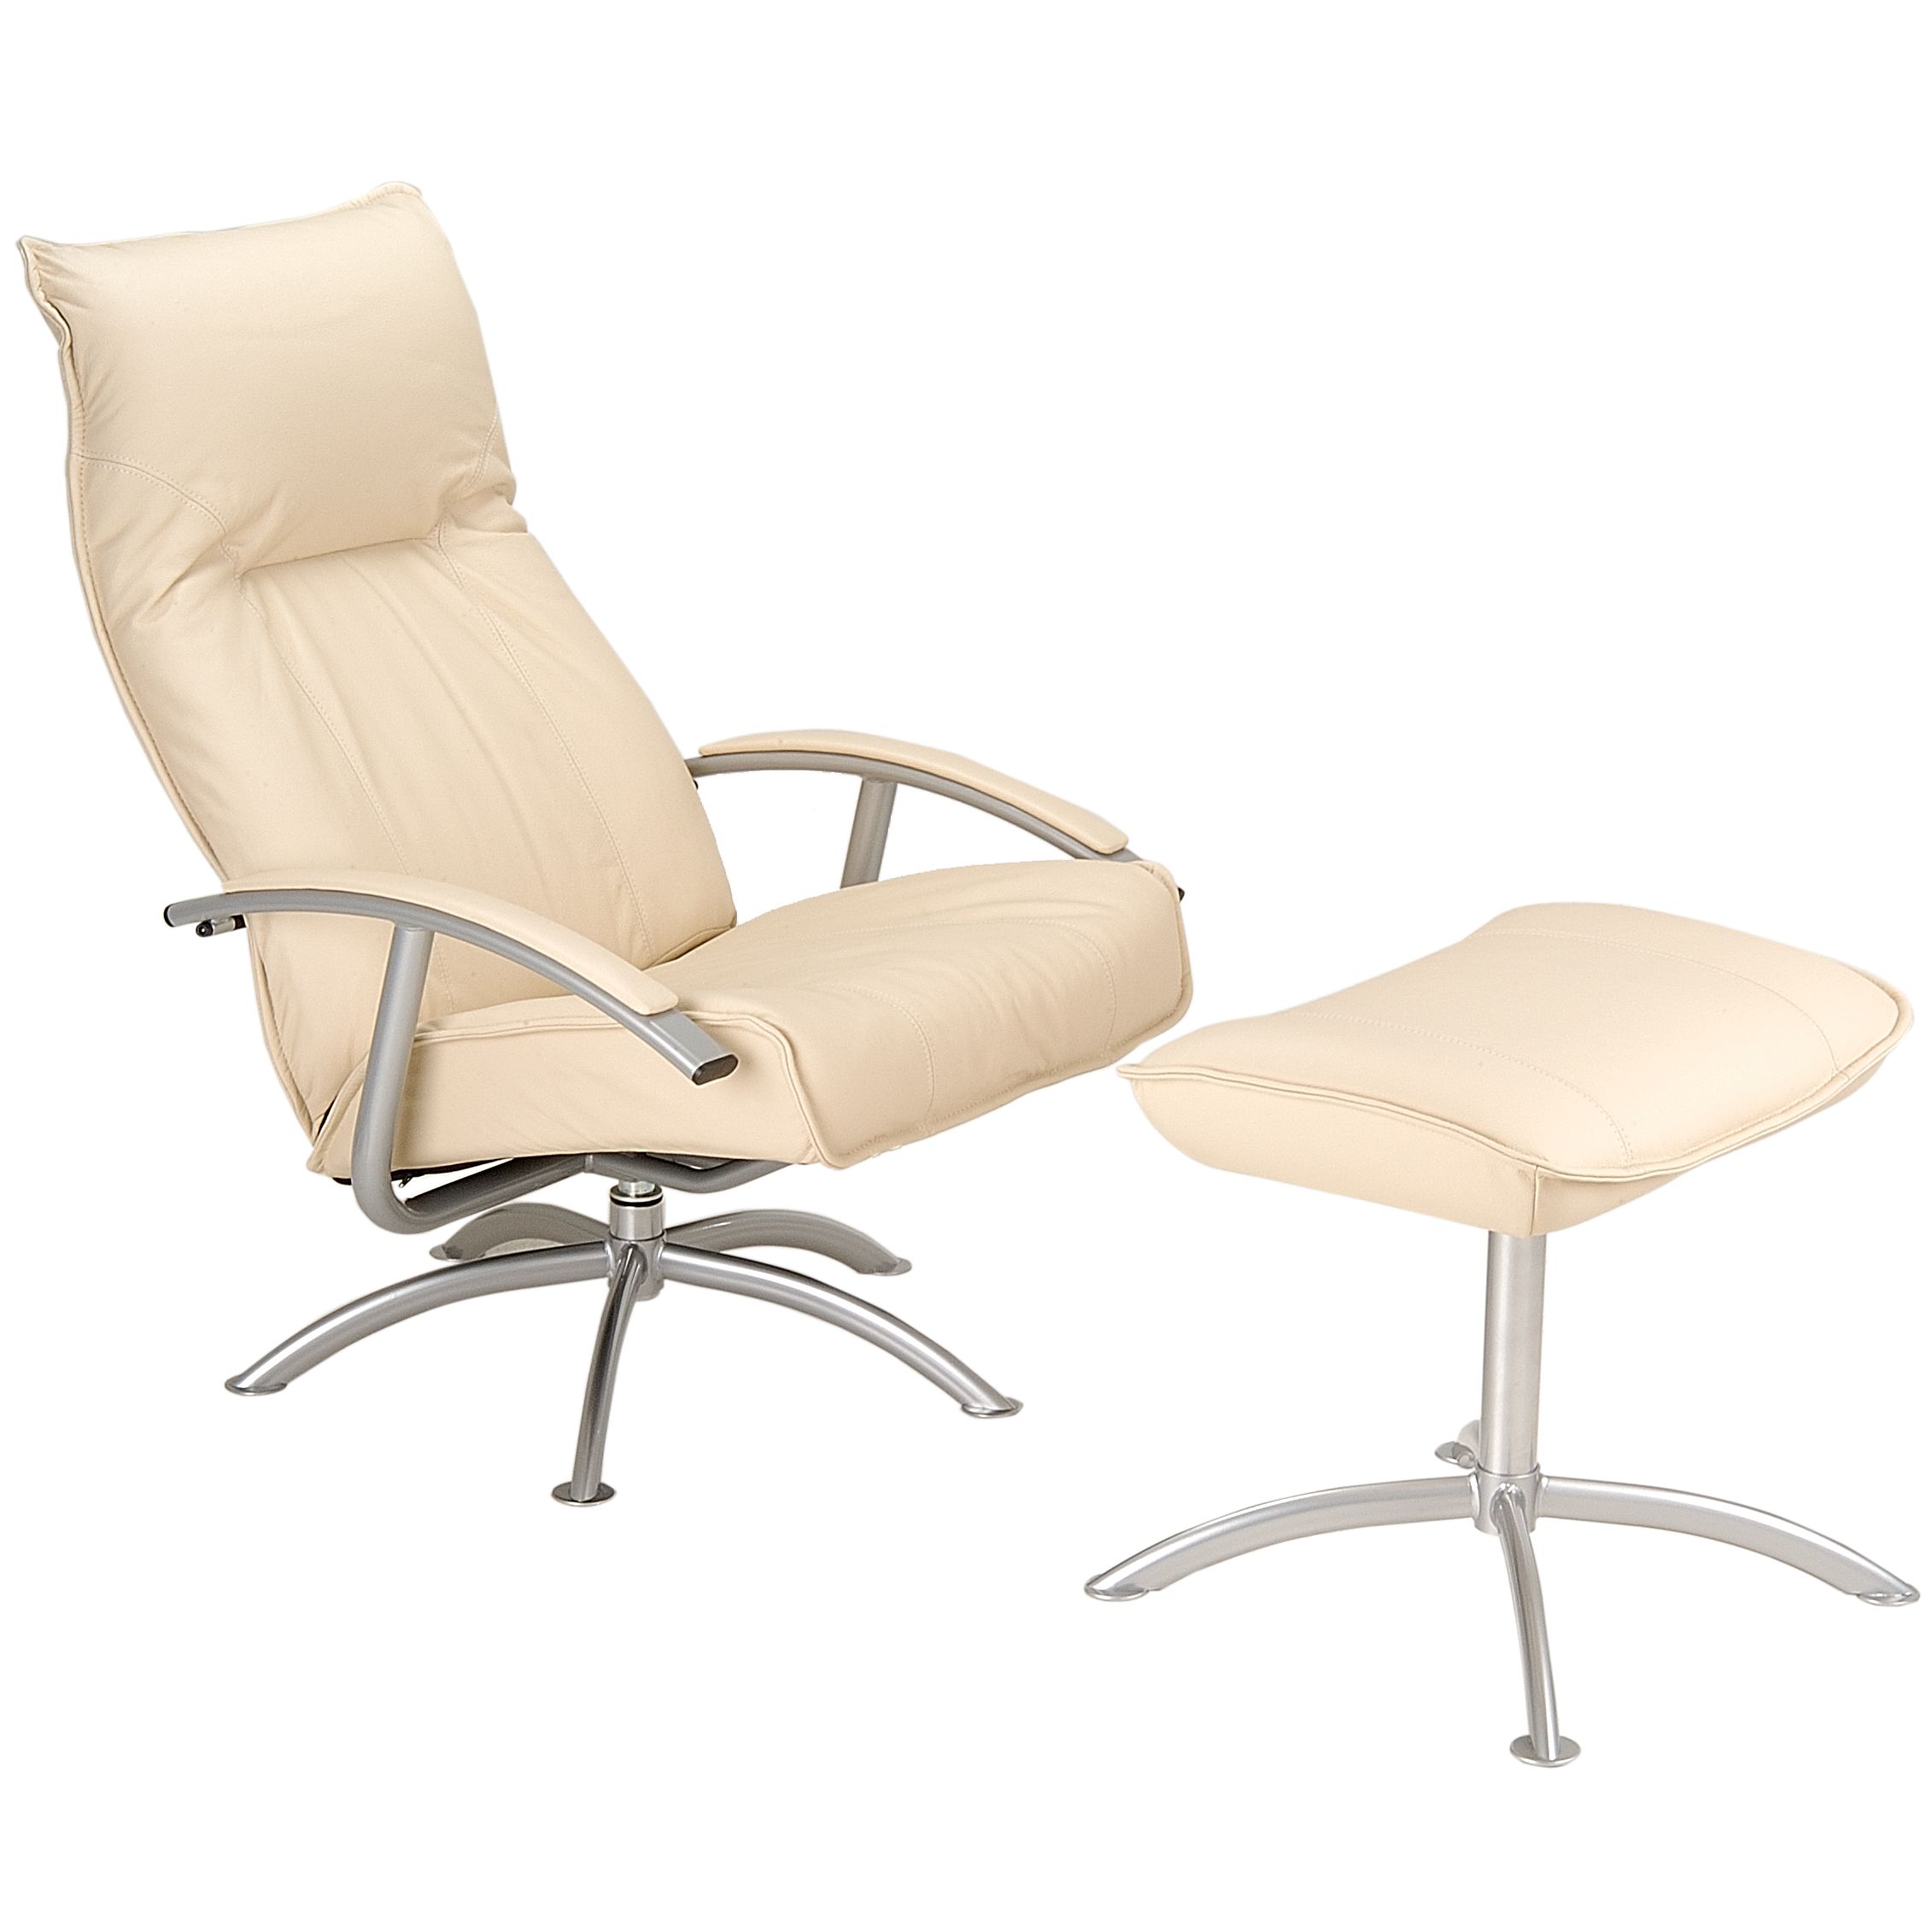 Techno Leather Chair and Footstool, Cream